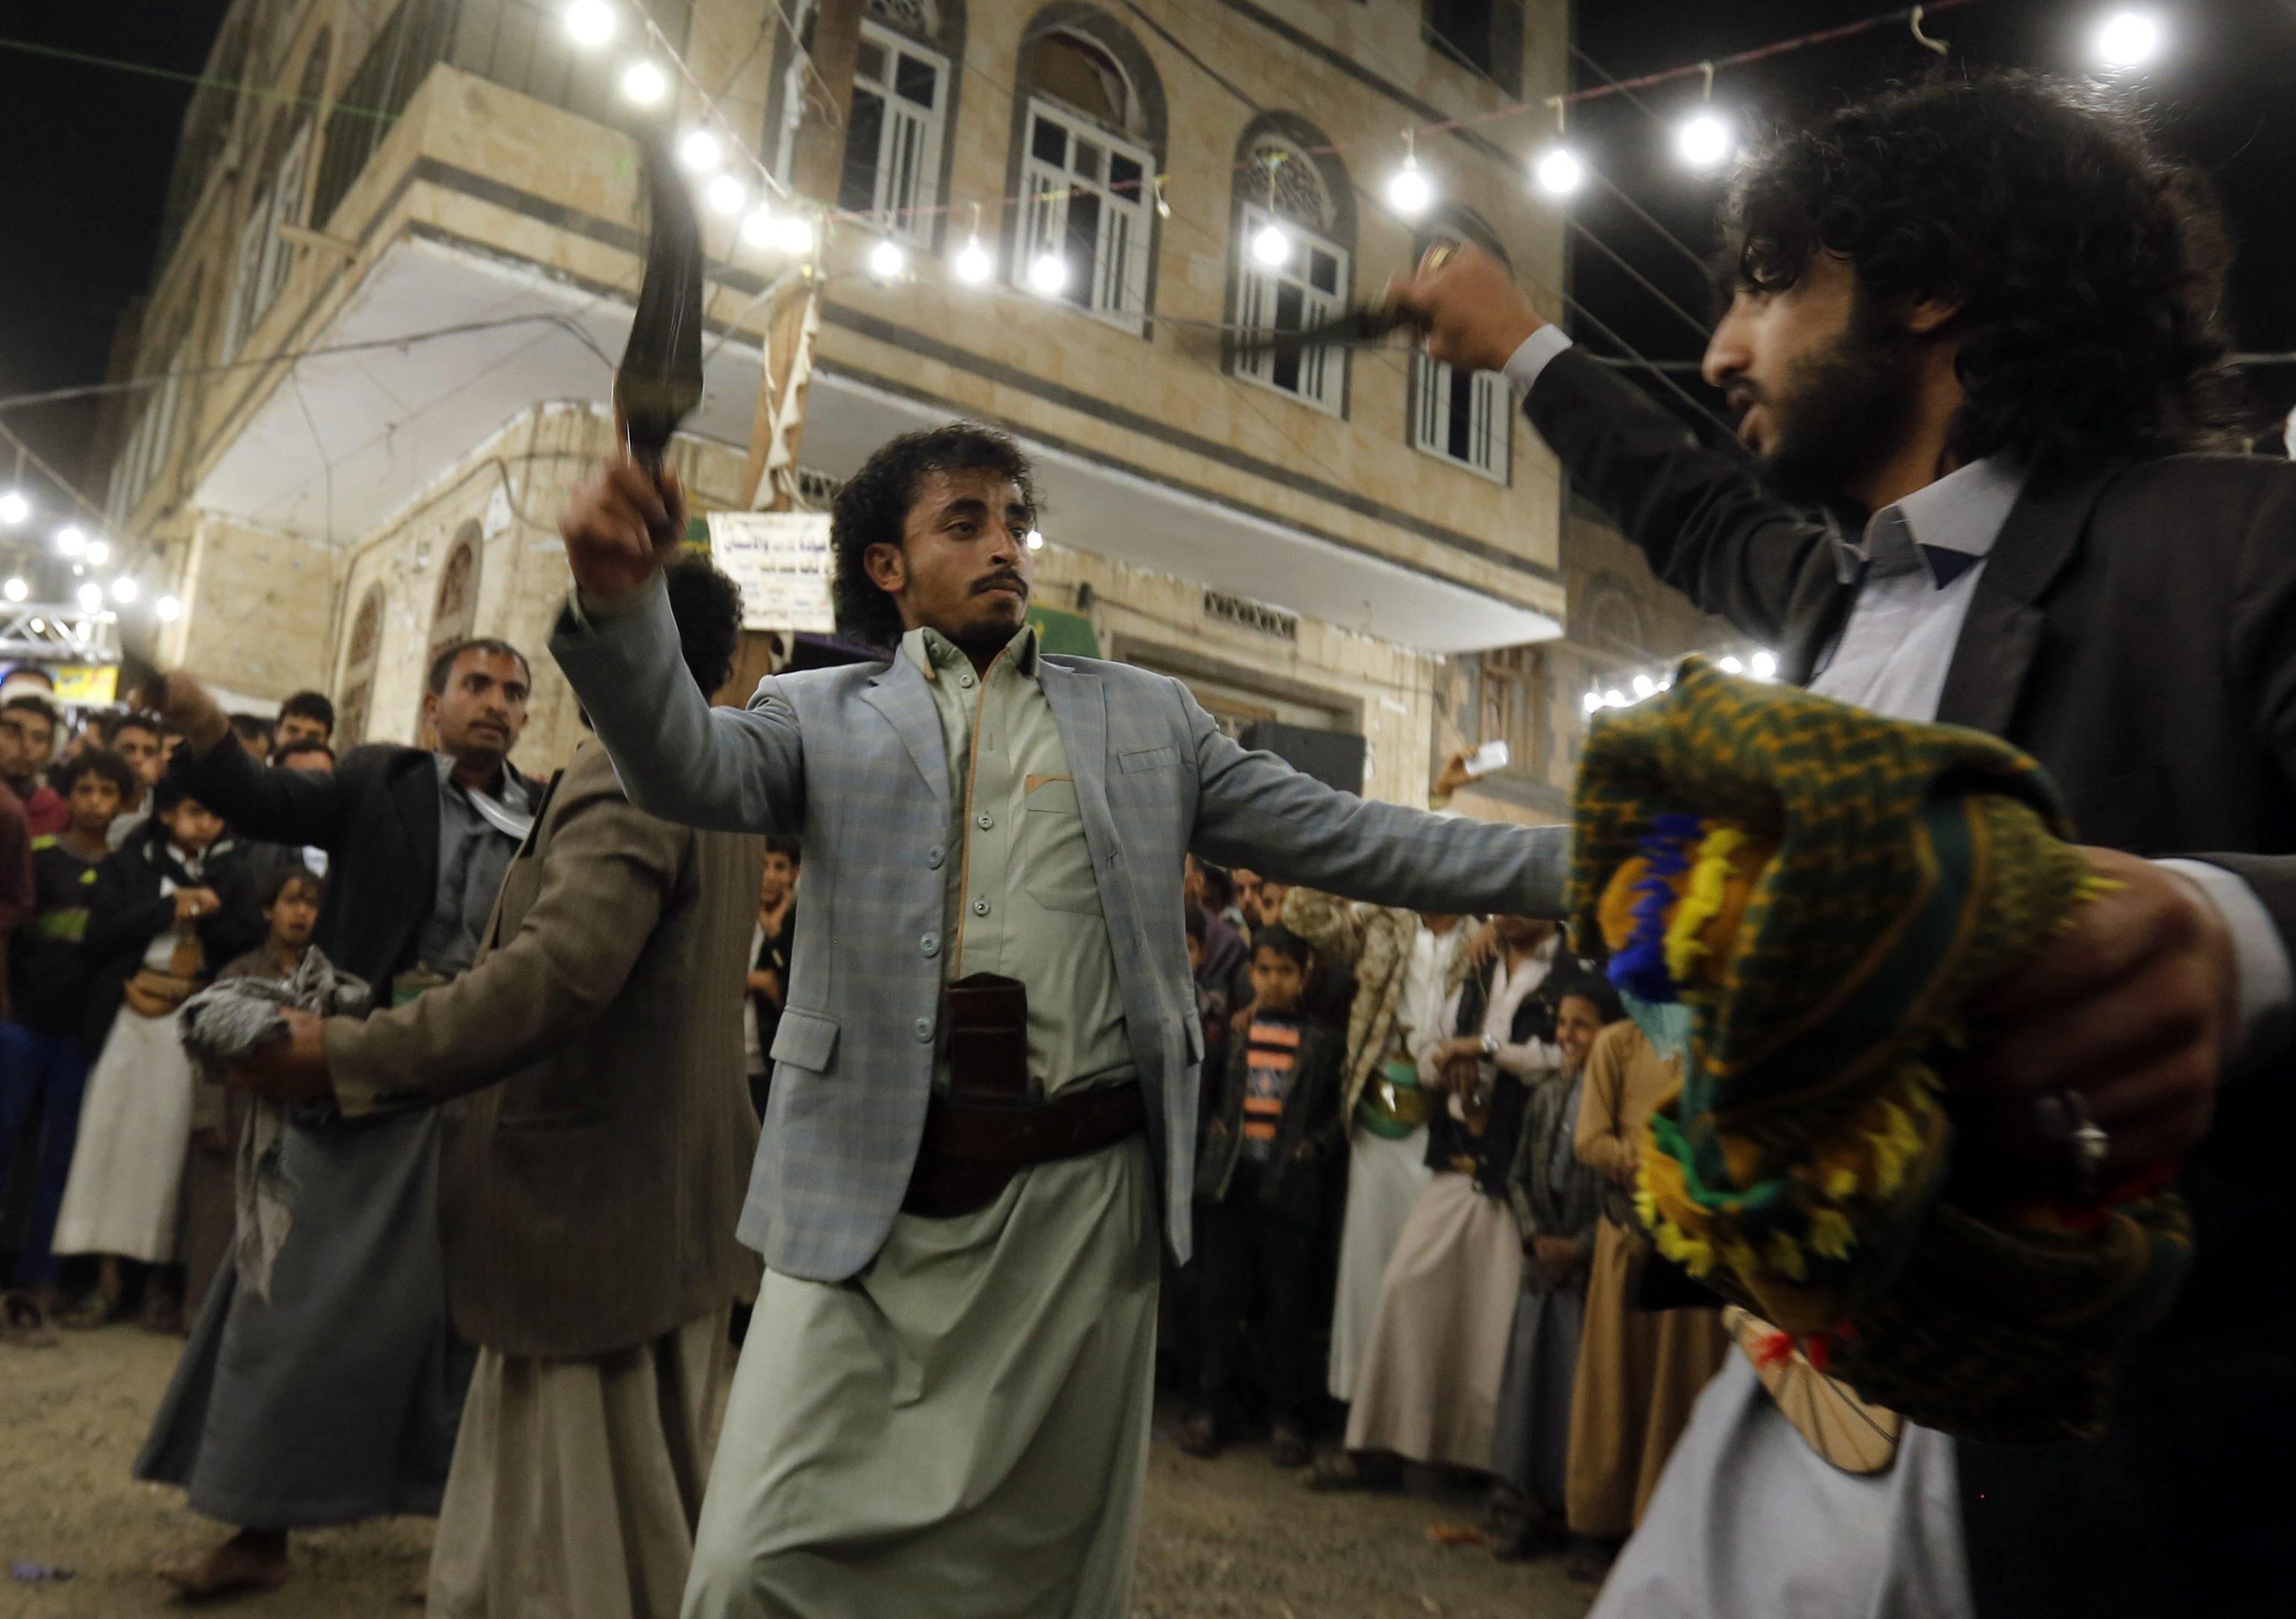 epaselect epa05775345 A picture made available on 06 February 2017 shows Yemenis performing traditional dances during a wedding ceremony in Sana'a, Yemen, 05 February 2017. Yemen has unique traditions that gives a special character to its weddings, which are costly and lavish, especially considering the country's low per capita income and its 22-month ongoing conflict. Upon strict Muslim traditions practiced in Yemen, the wedding parties are held without intermixing; the brides and grooms are kept in separate halls.  EPA/YAHYA ARHAB